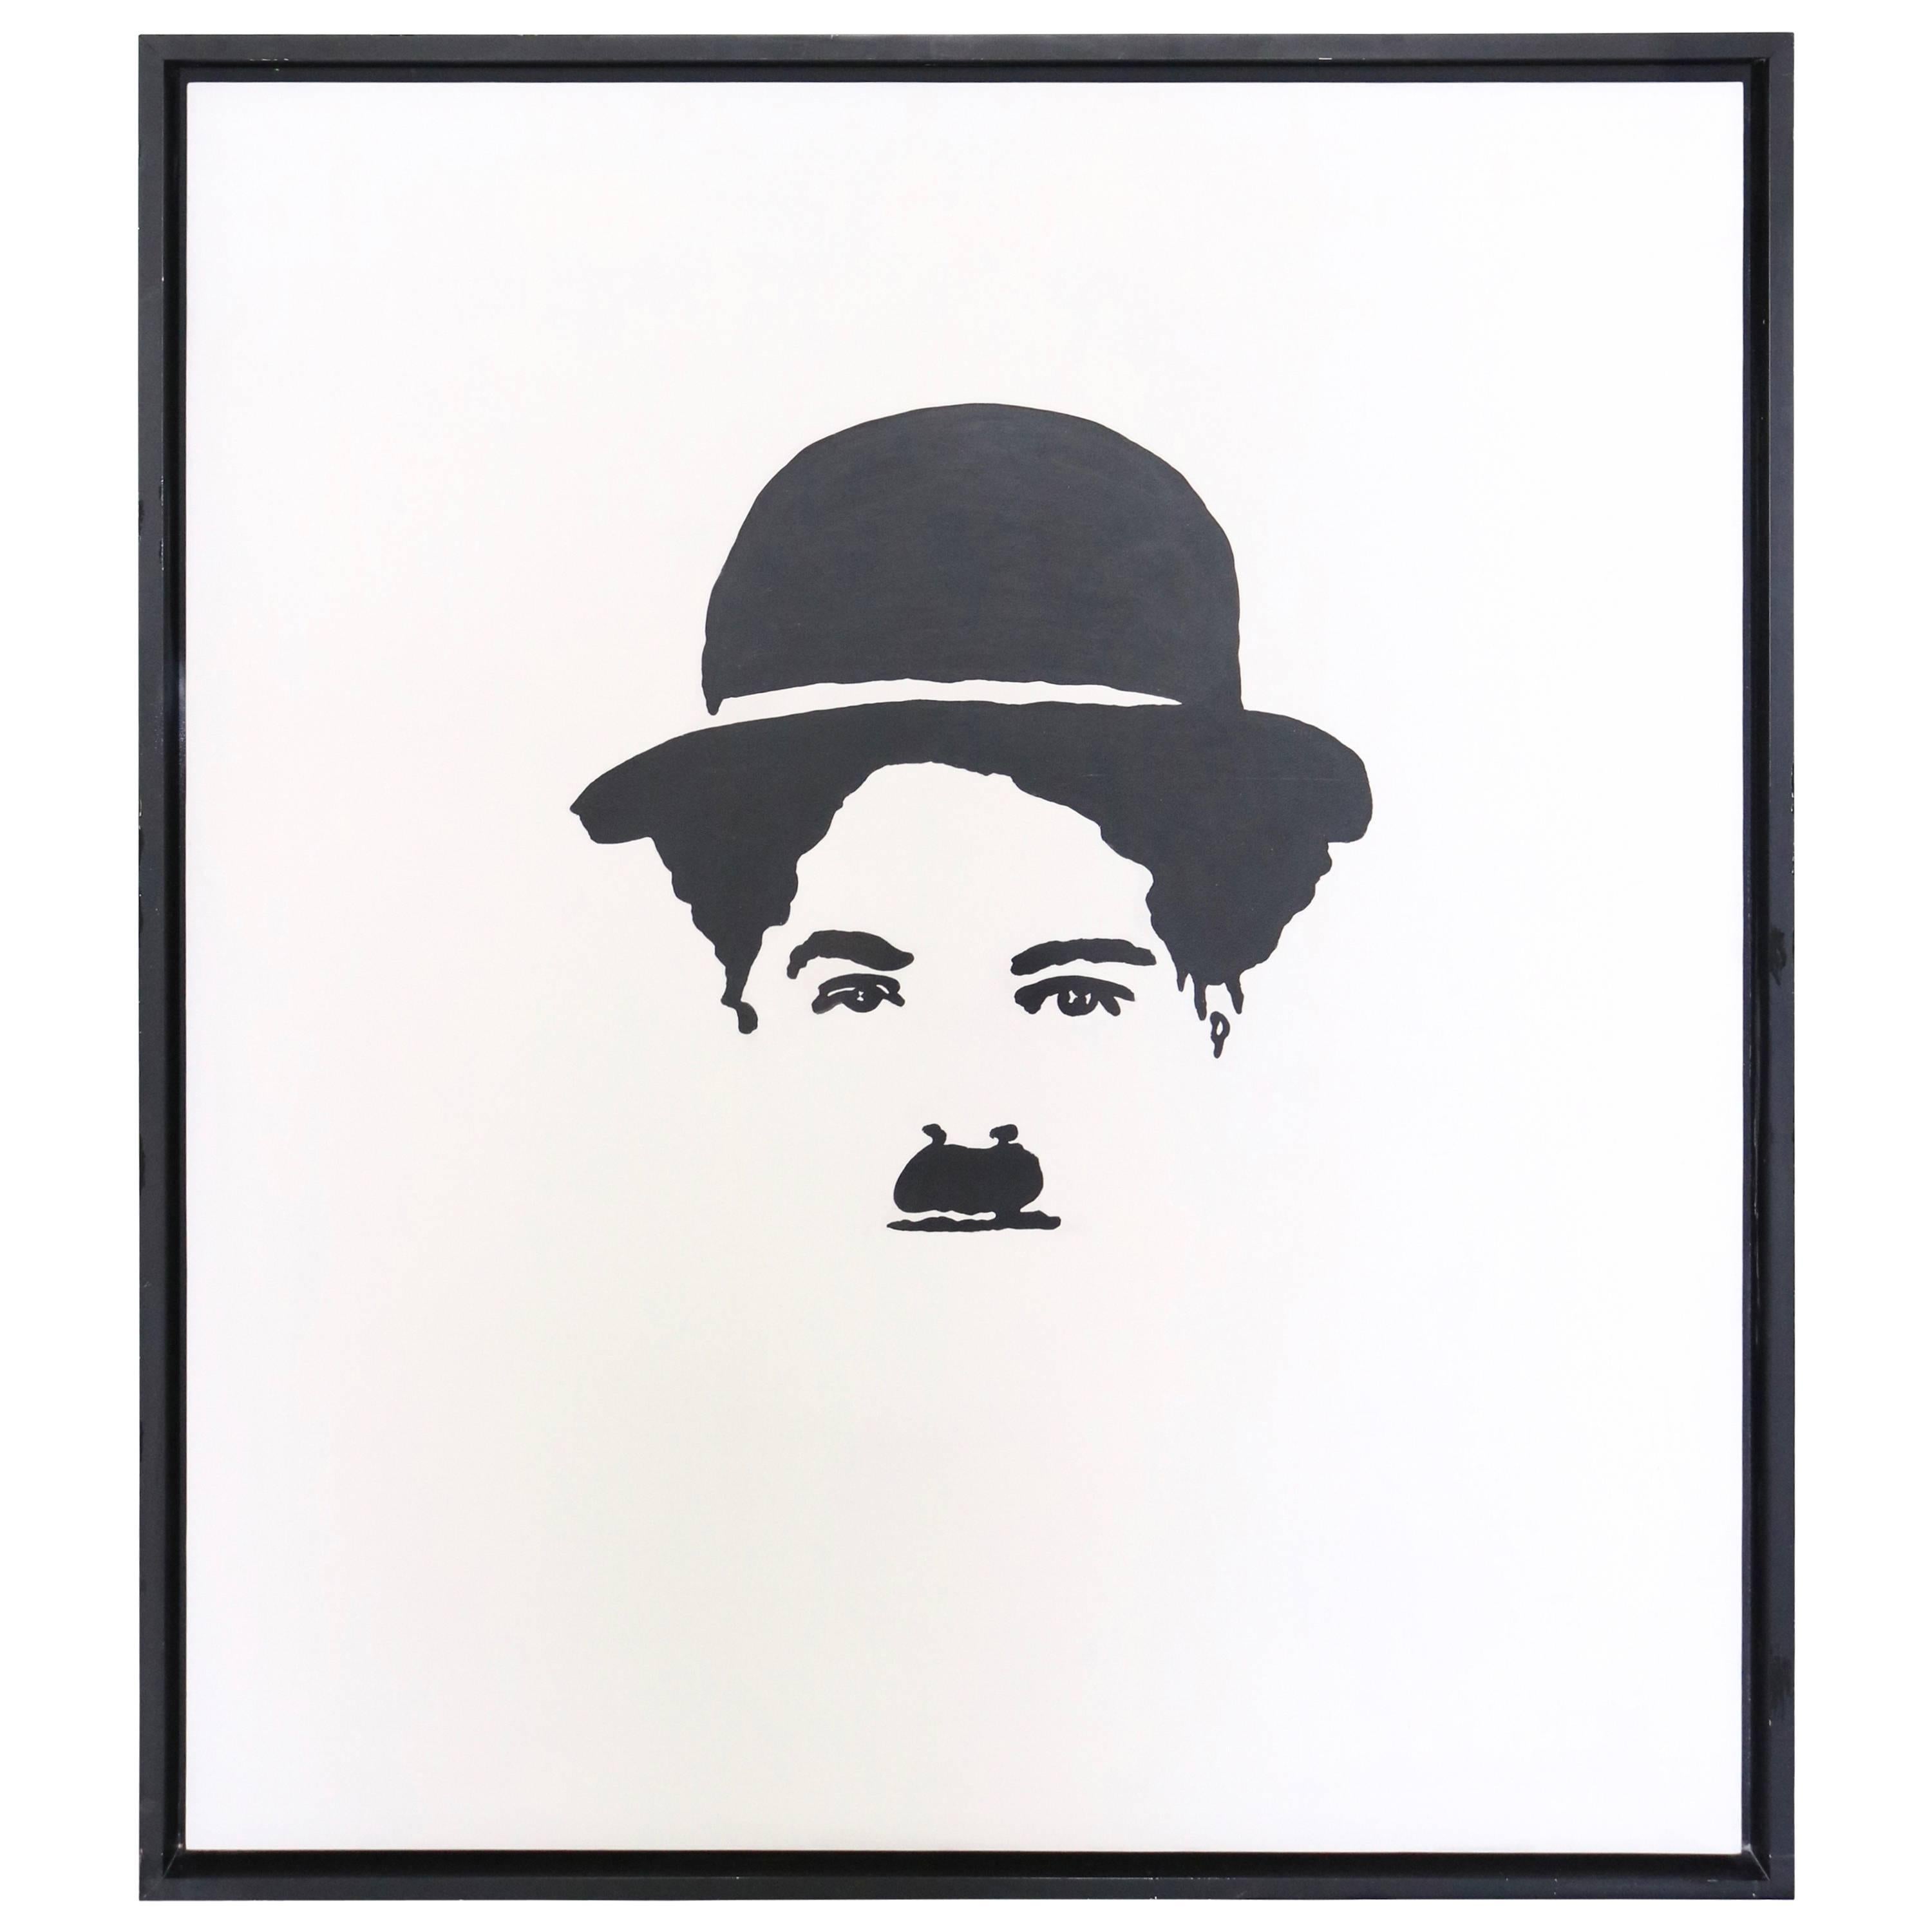 Large-Scale Oil on Board Painting of Charlie Chaplin in Black and White